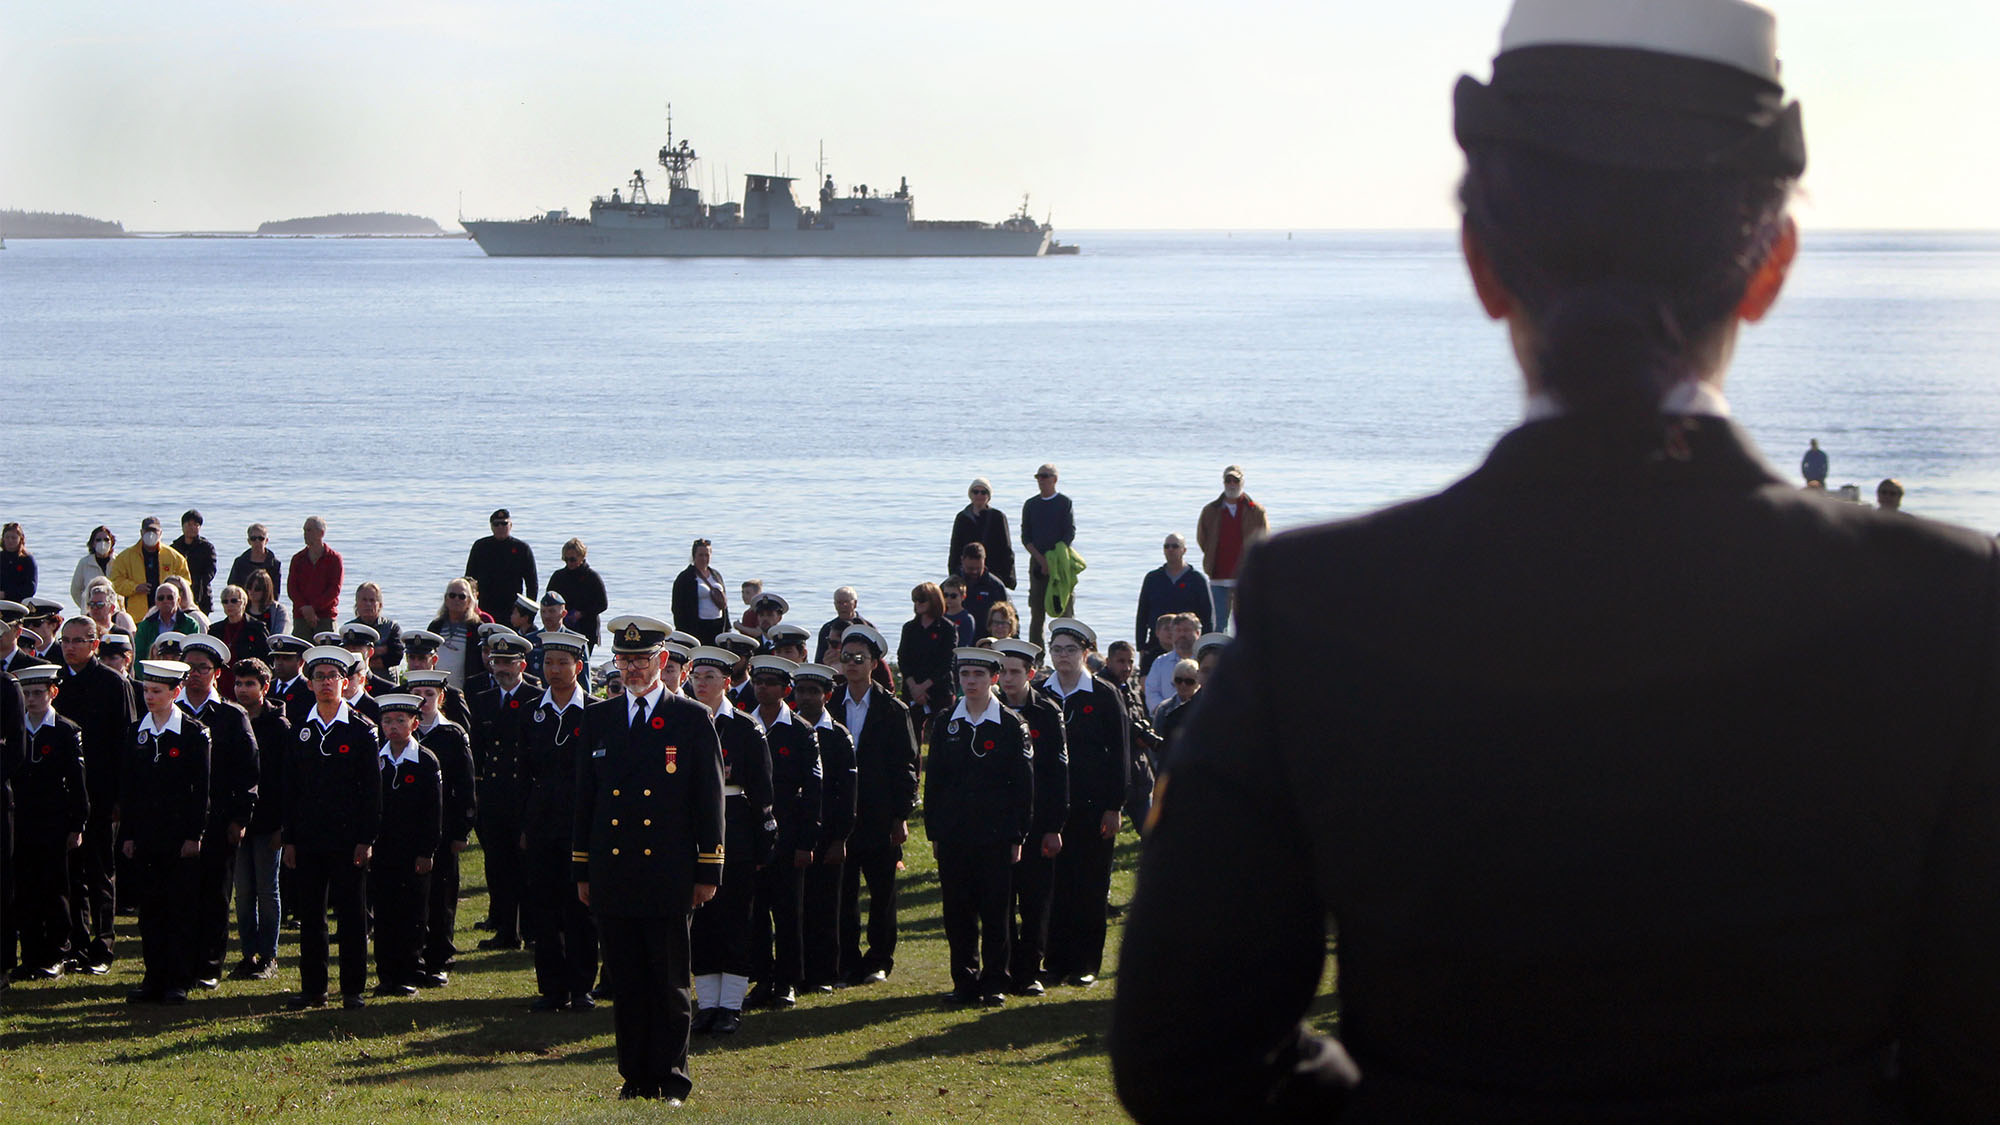 Hundreds attended the Remembrance Day Ceremony at Point Pleasant Park on Friday. This is the 40th year HMCS Scotian, the local reserve division of the Royal Canadian Navy, has hosted a Remembrance Day ceremony.